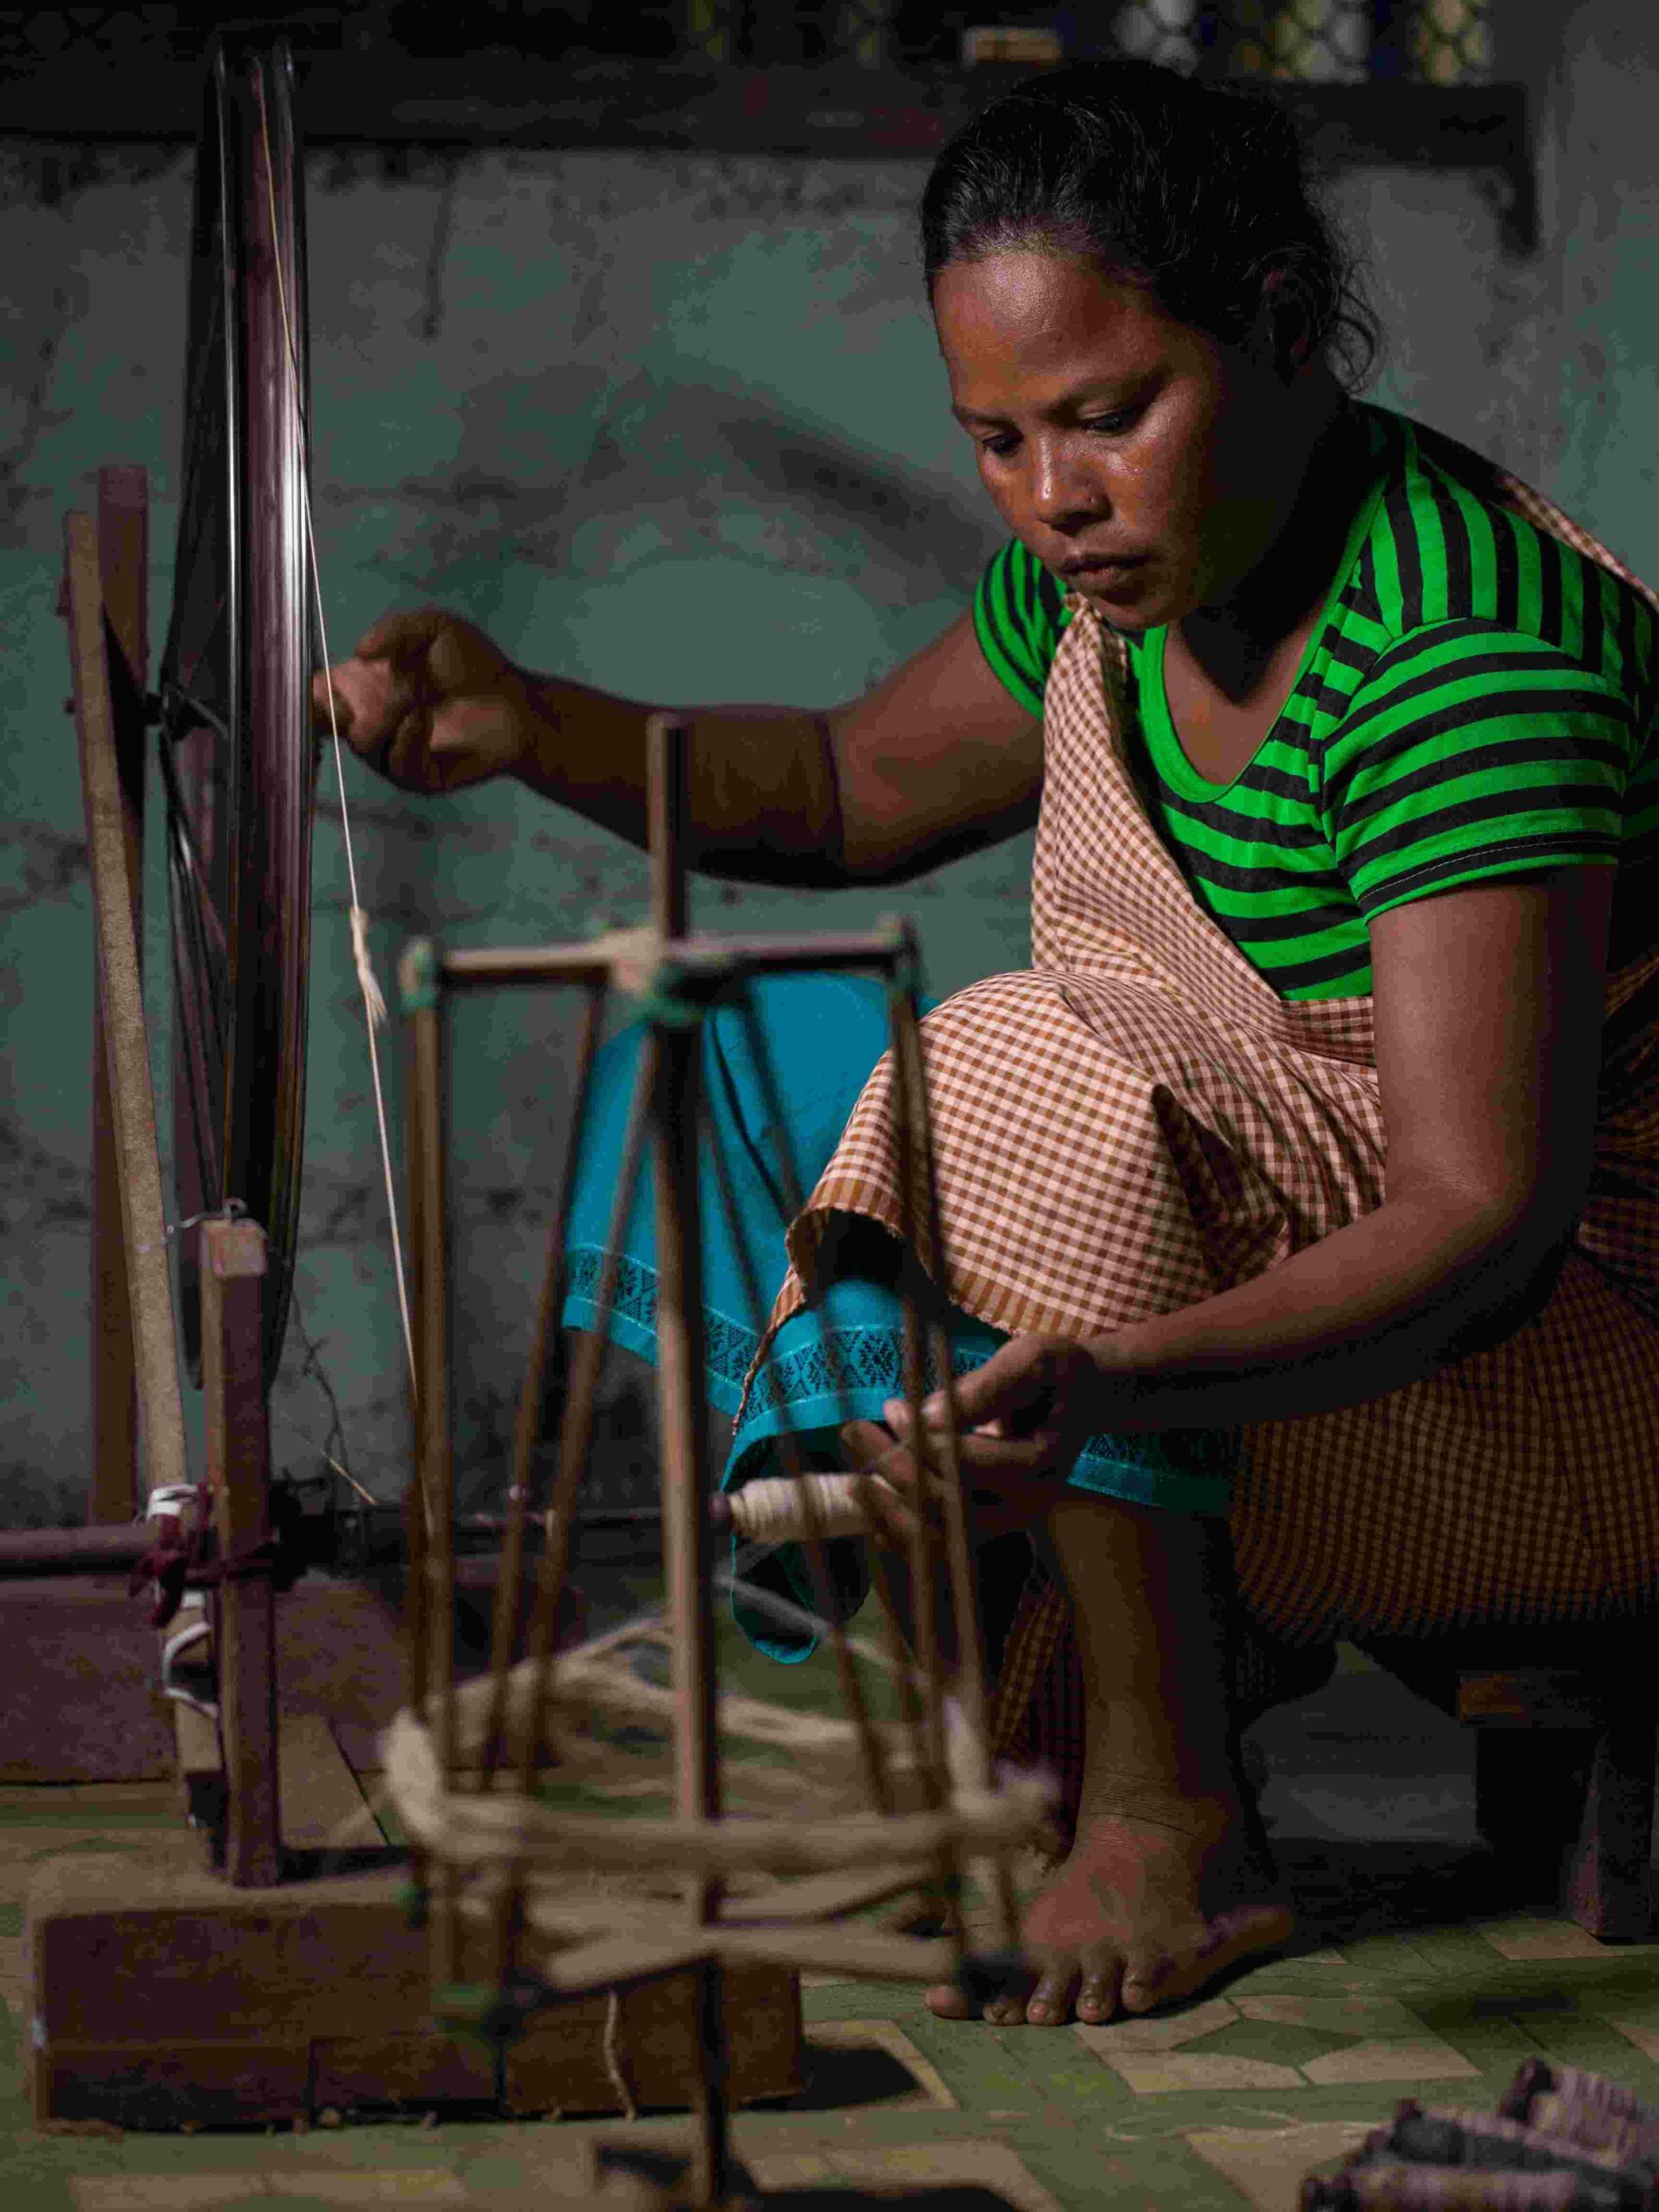 The artisans working at Kiniho are majorly youth from Meghalaya who are unable to find jobs